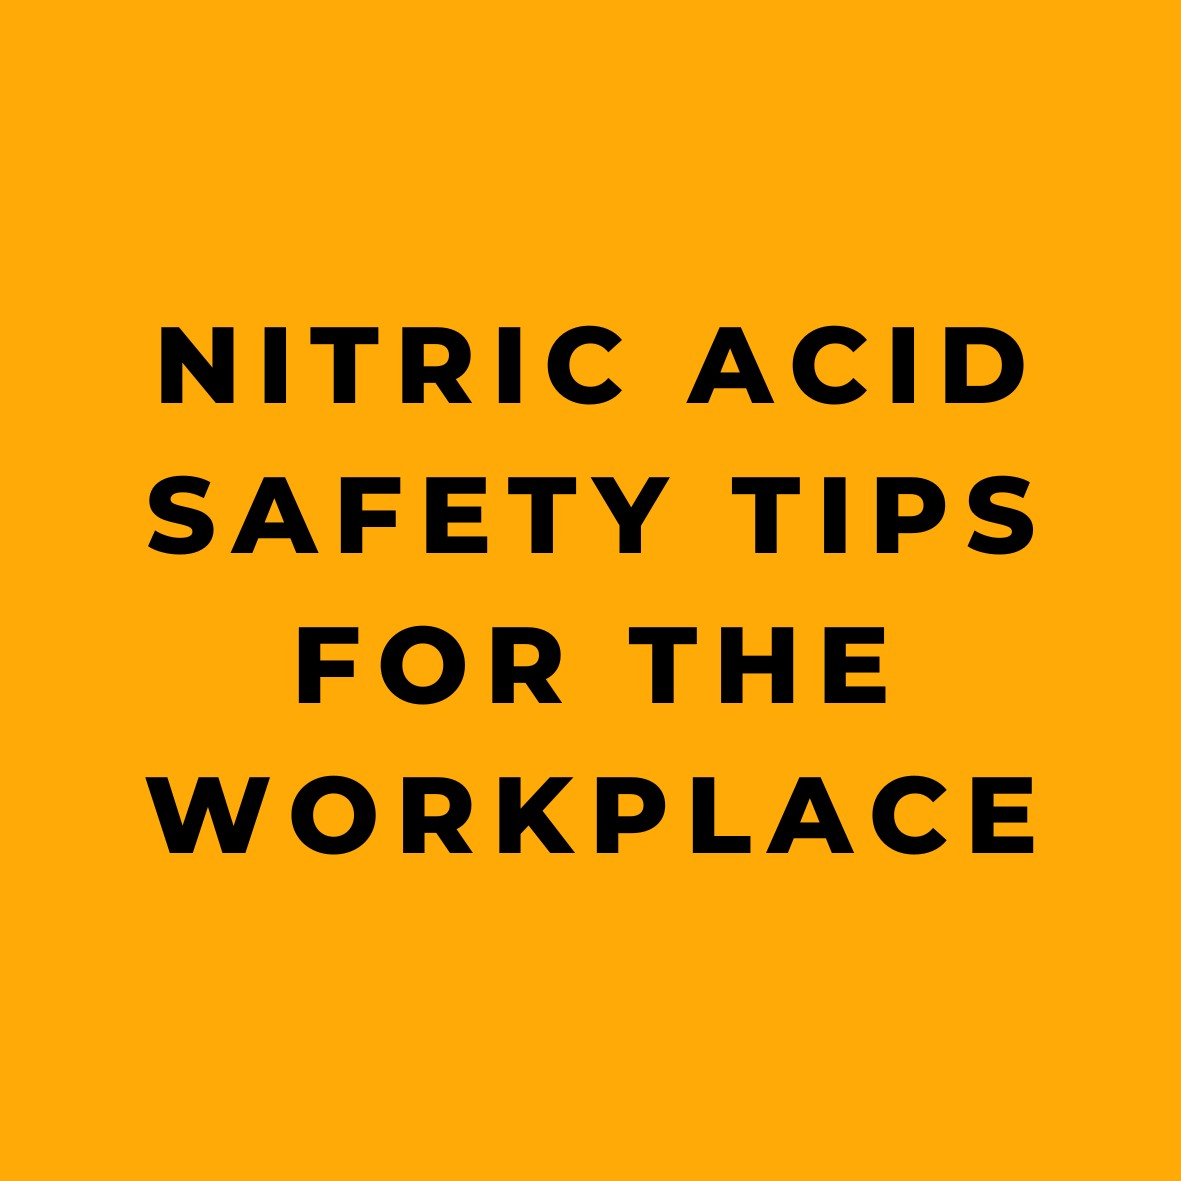 Nitric Acid Safety Tips for the workplace